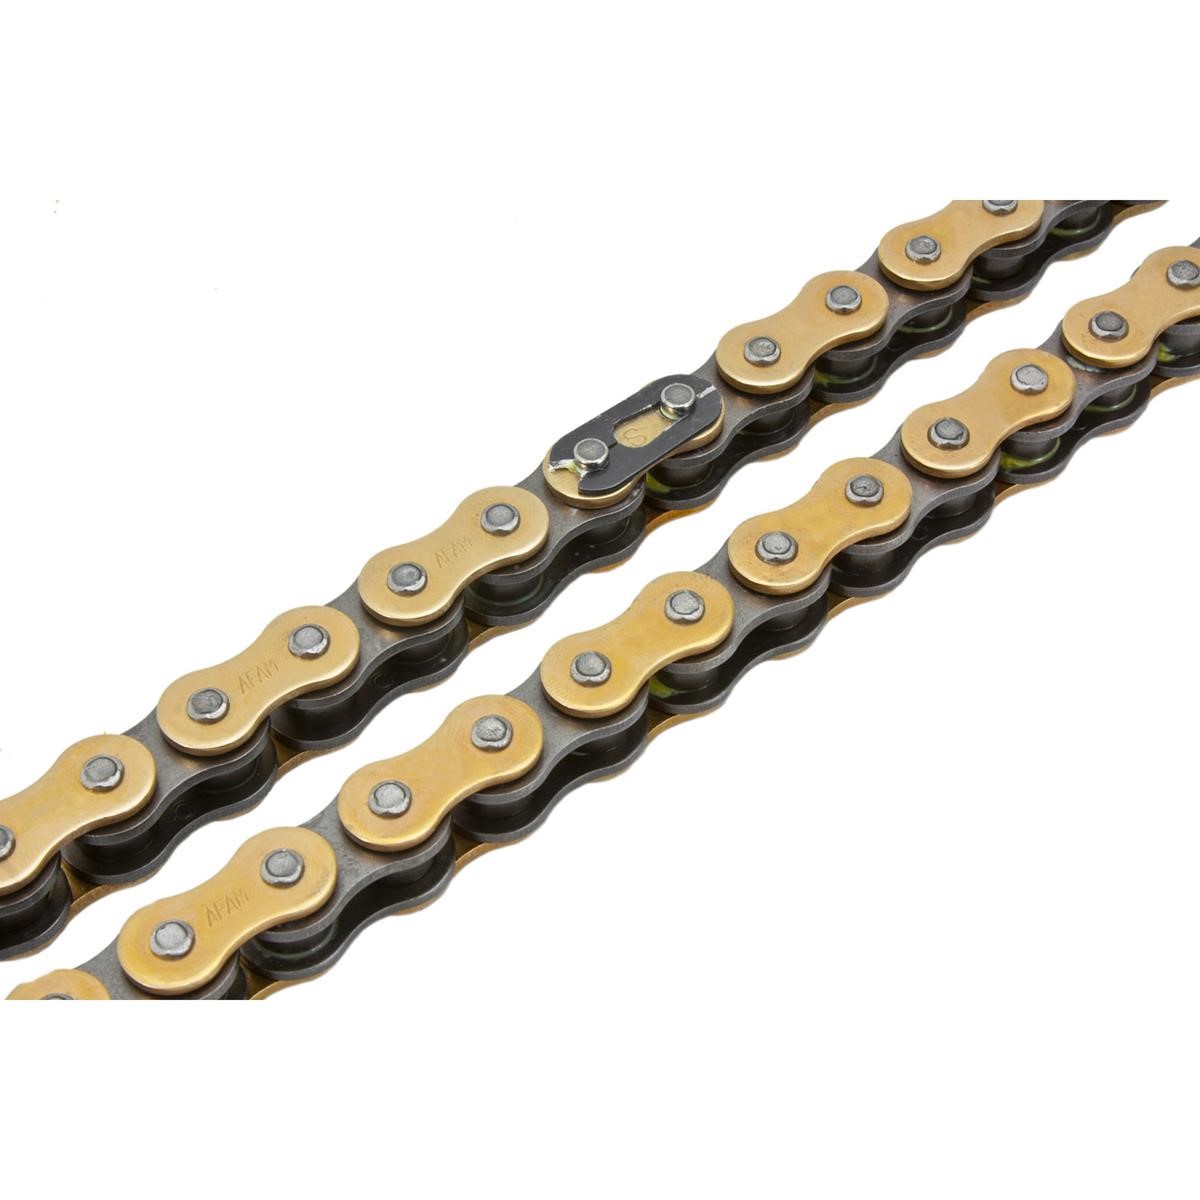 Afam Chain A420MX 420 Pitch, Gold